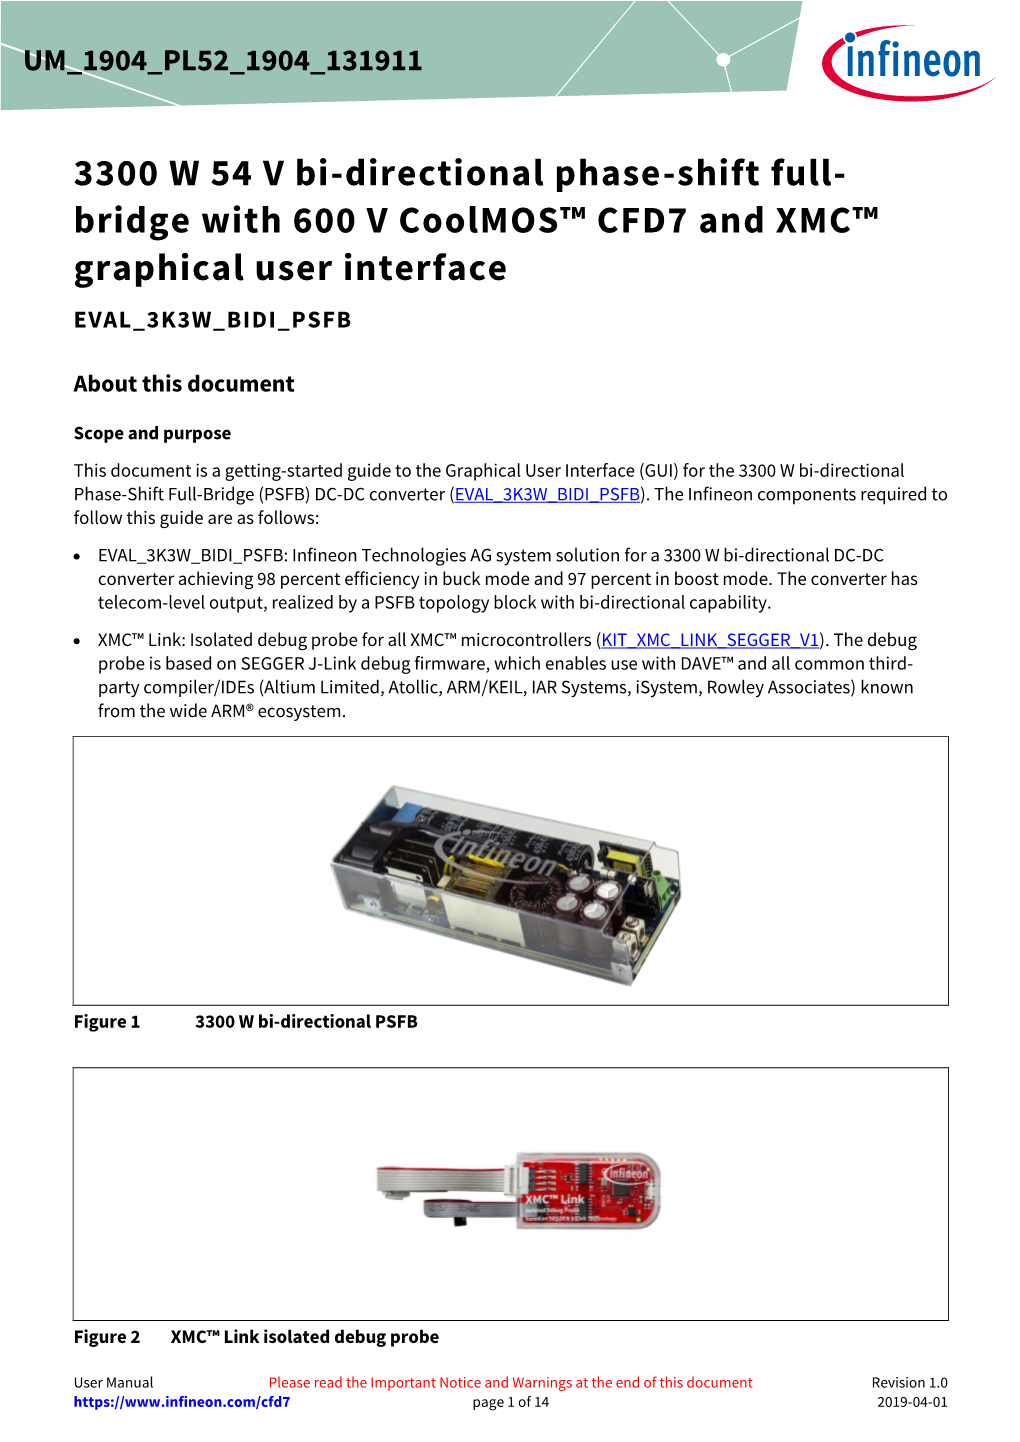 Bridge with 600 V Coolmos™ CFD7 and XMC™ Graphical User Interface EVAL 3K3W BIDI PSFB